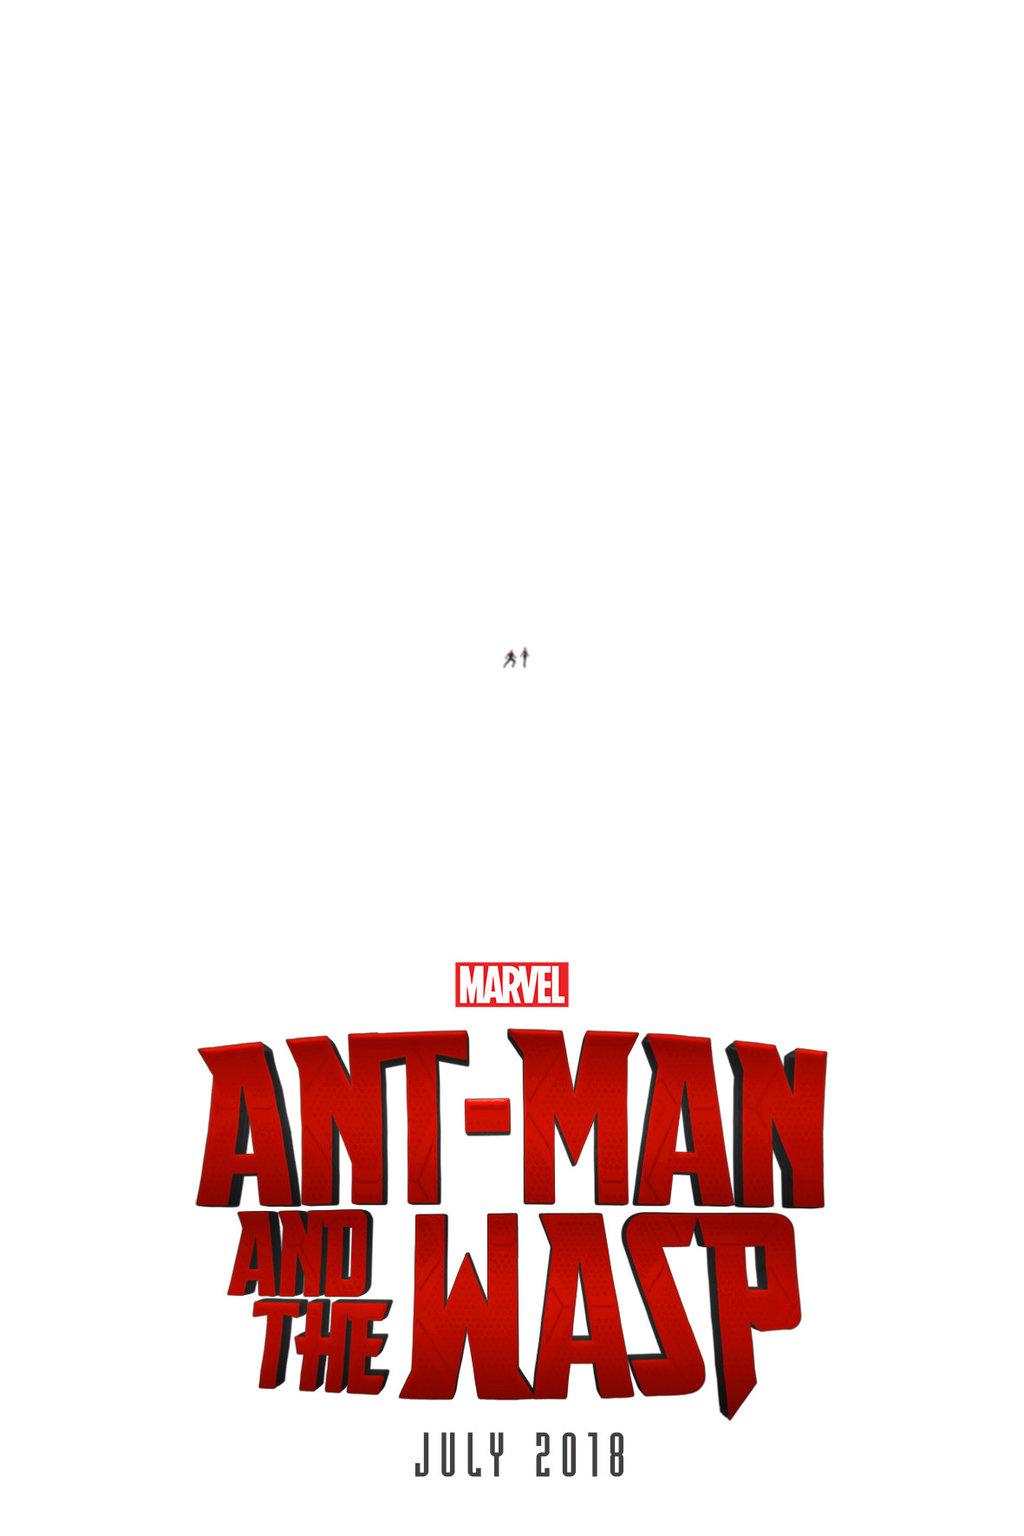 Ant man and the wasp logo design